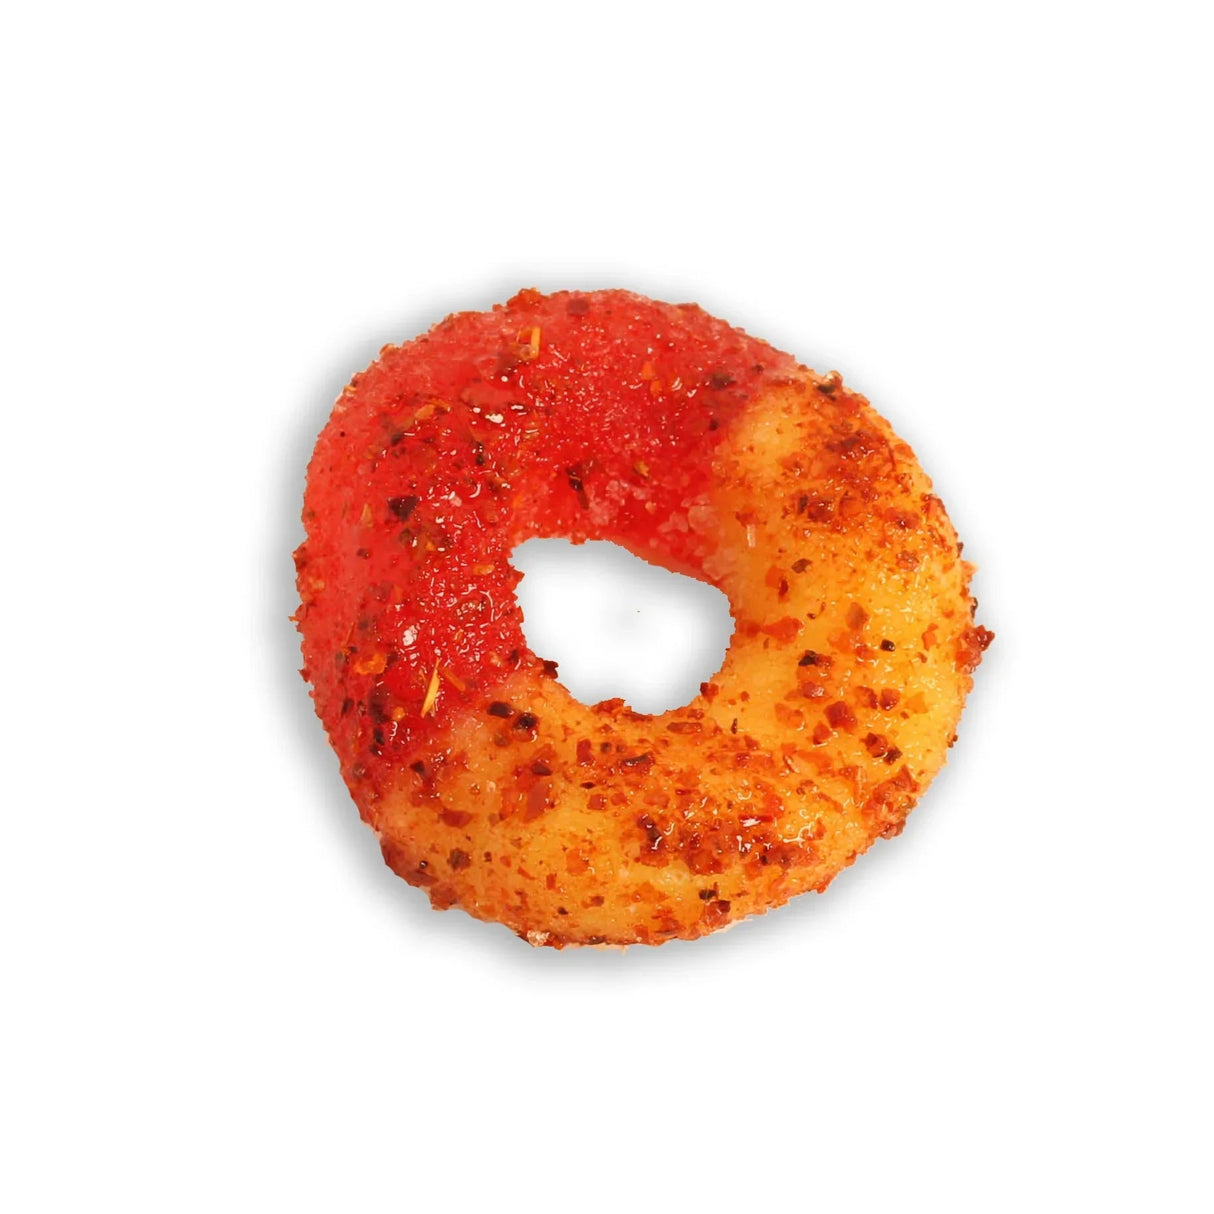 Chilli Bomba Spicy Peach Rings 8oz - Top View on White Background